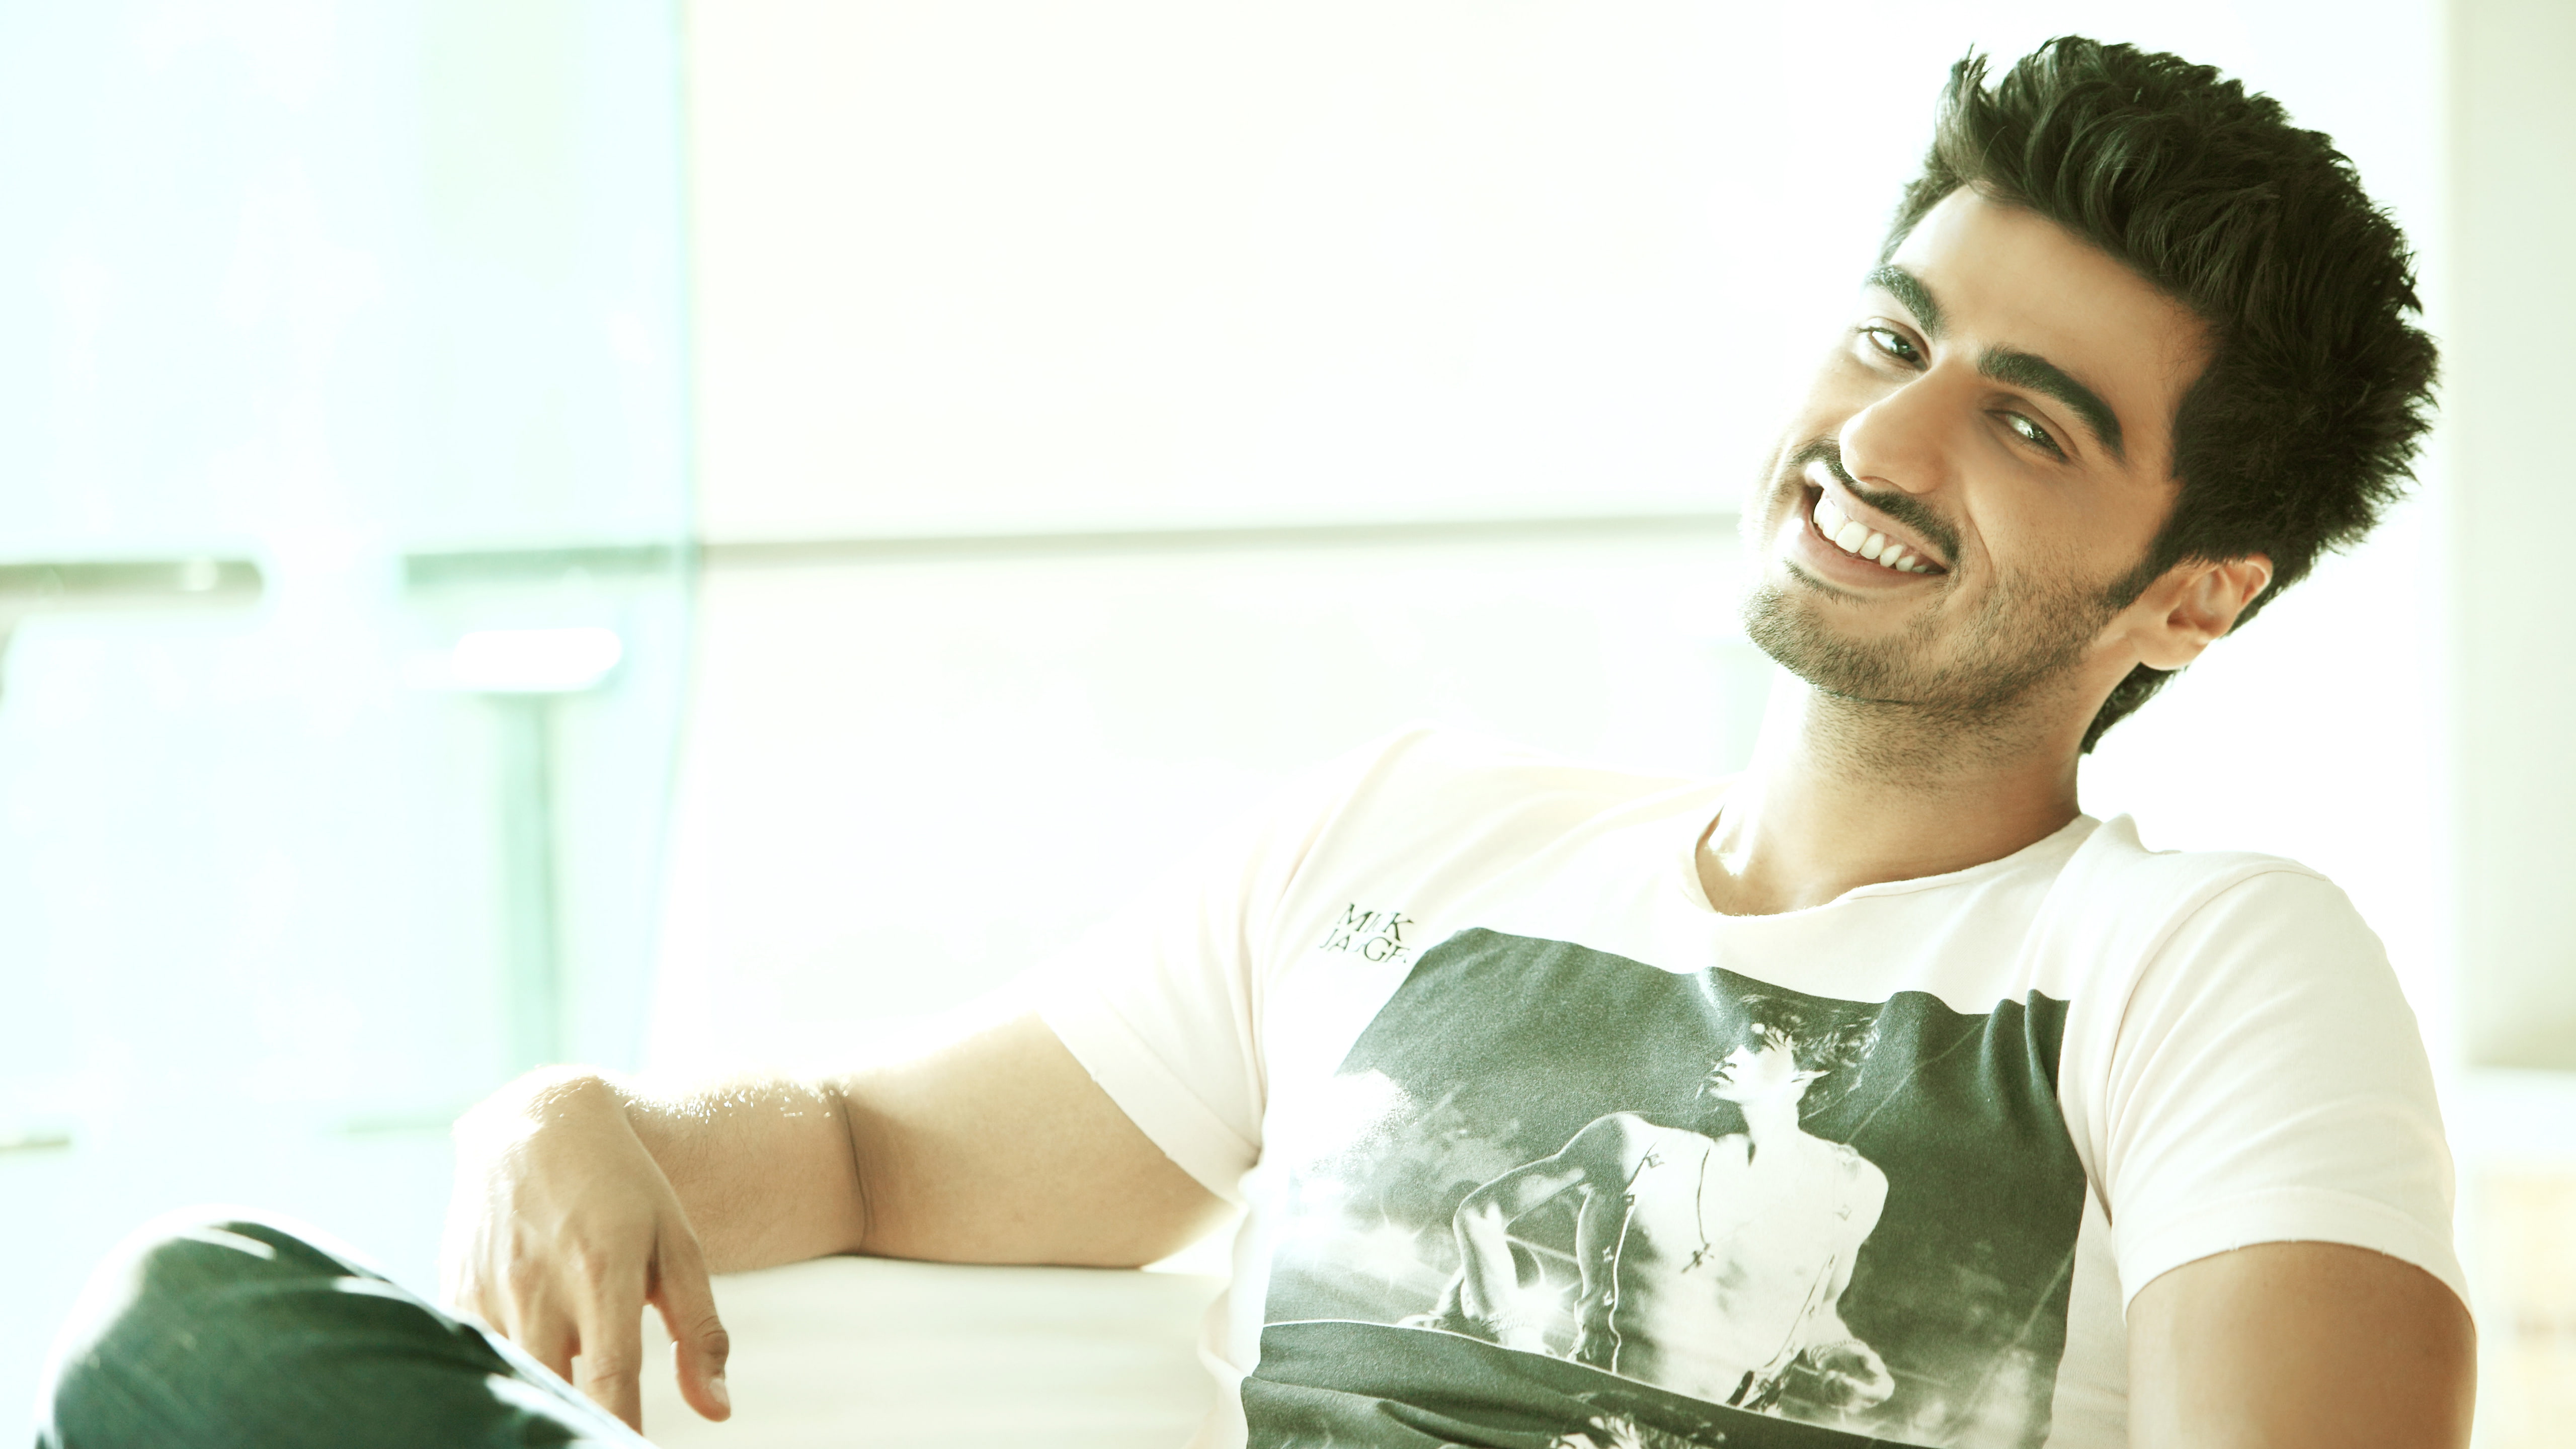 4K, Indian actor, 5K, Arjun Kapoor, Bollywood, young adult